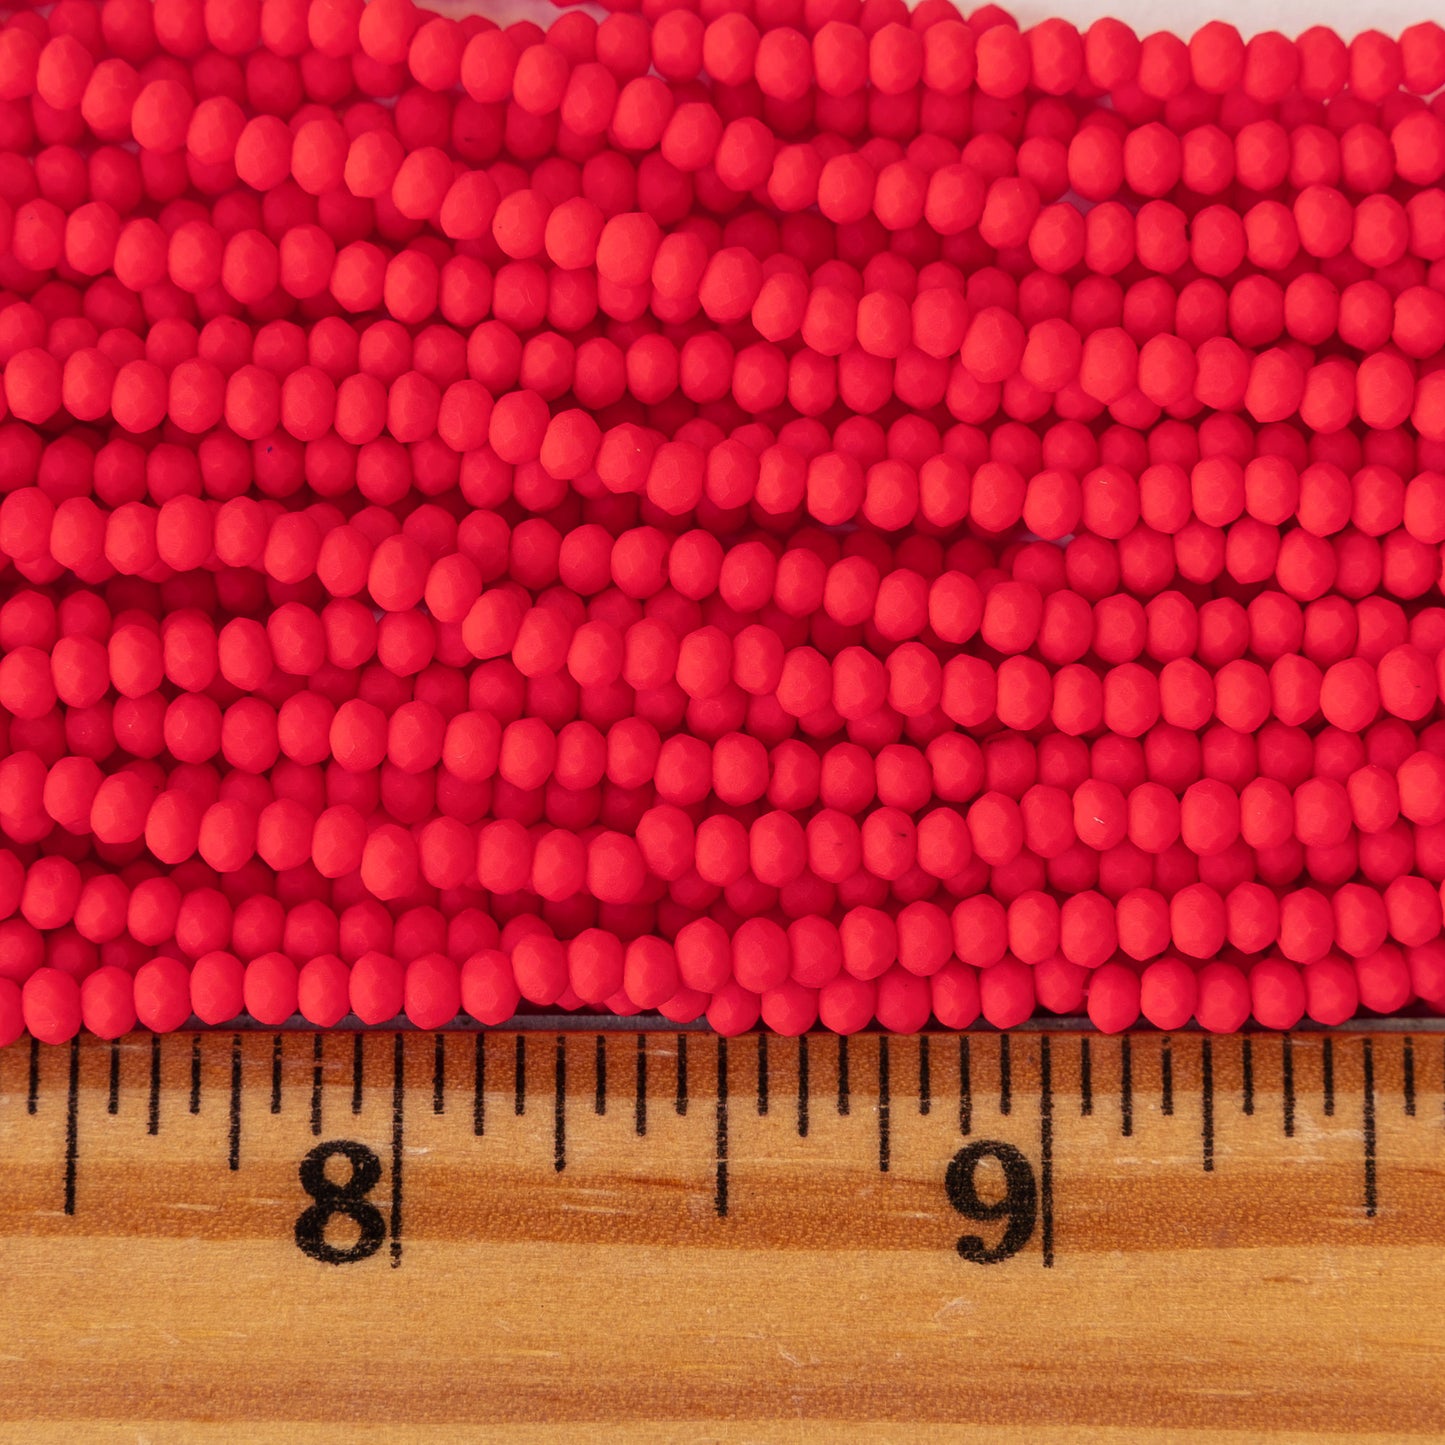 3x2mm Faceted Glass Rondelles - Red Matte ~ 200 Beads - 16 inches